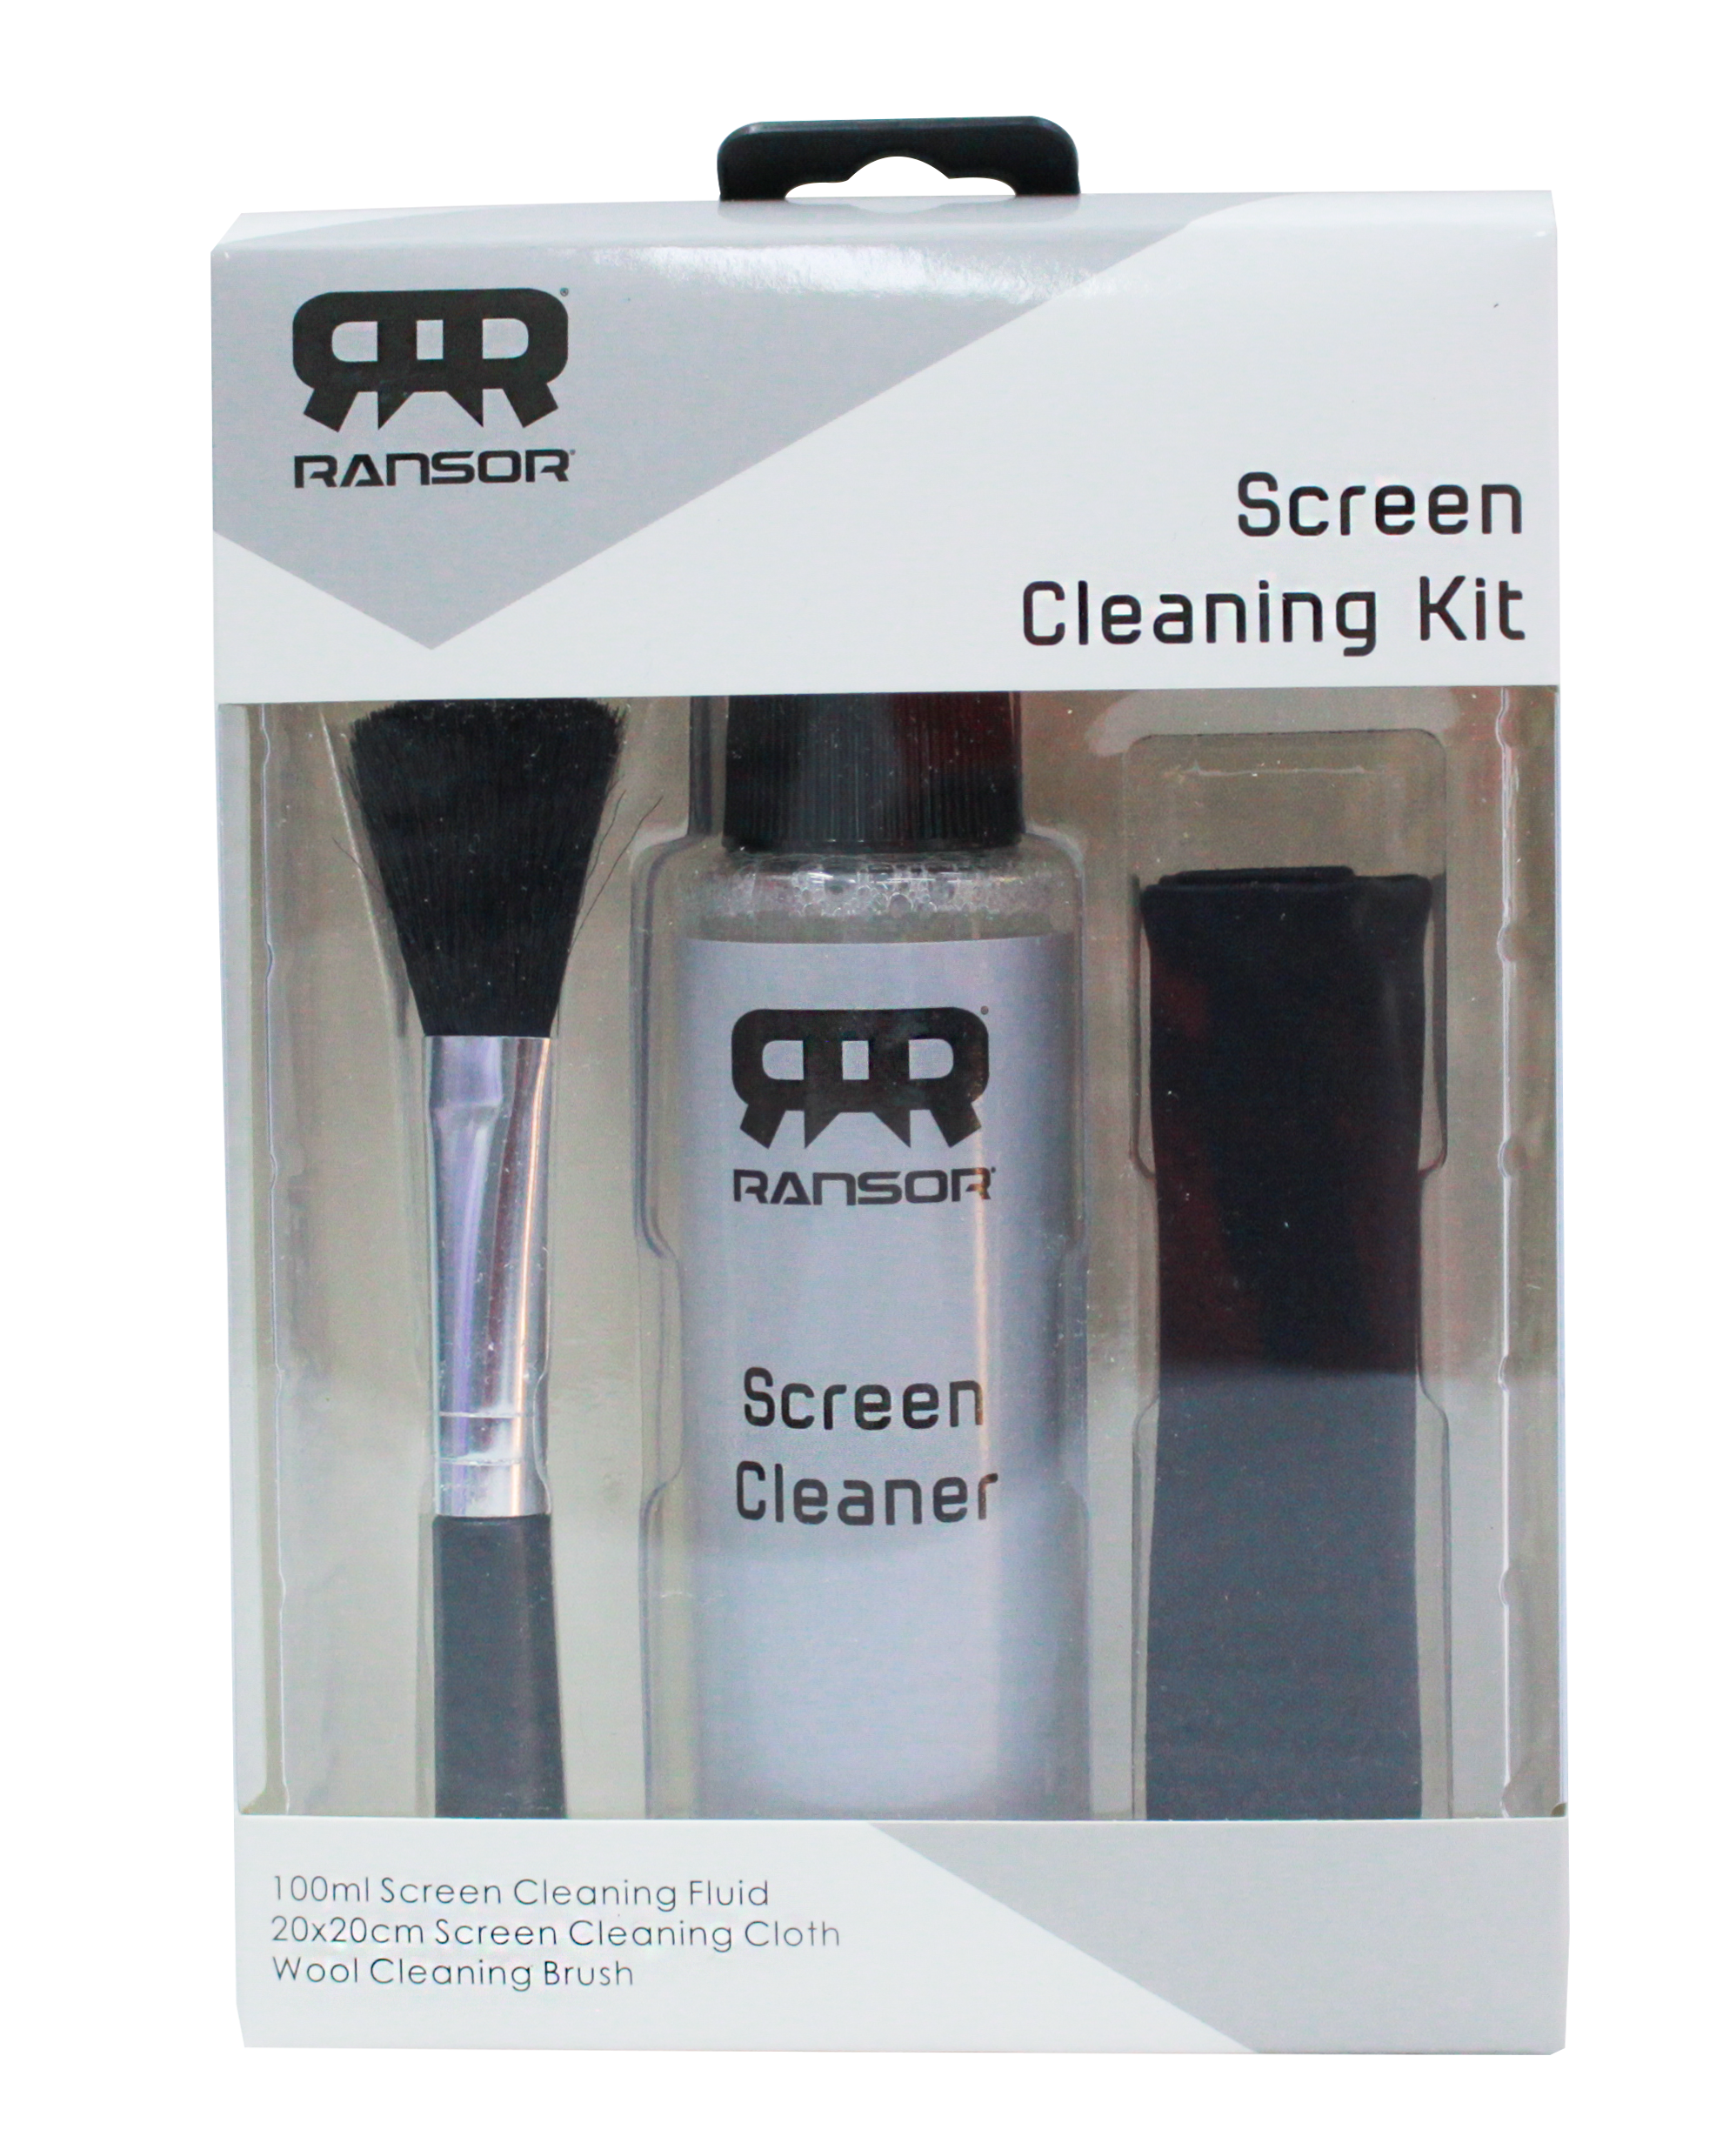 Ransor Screen Cleaning Kit 100ml Spray Cleaner With Microfiber Cleaning Cloth 20*20cm